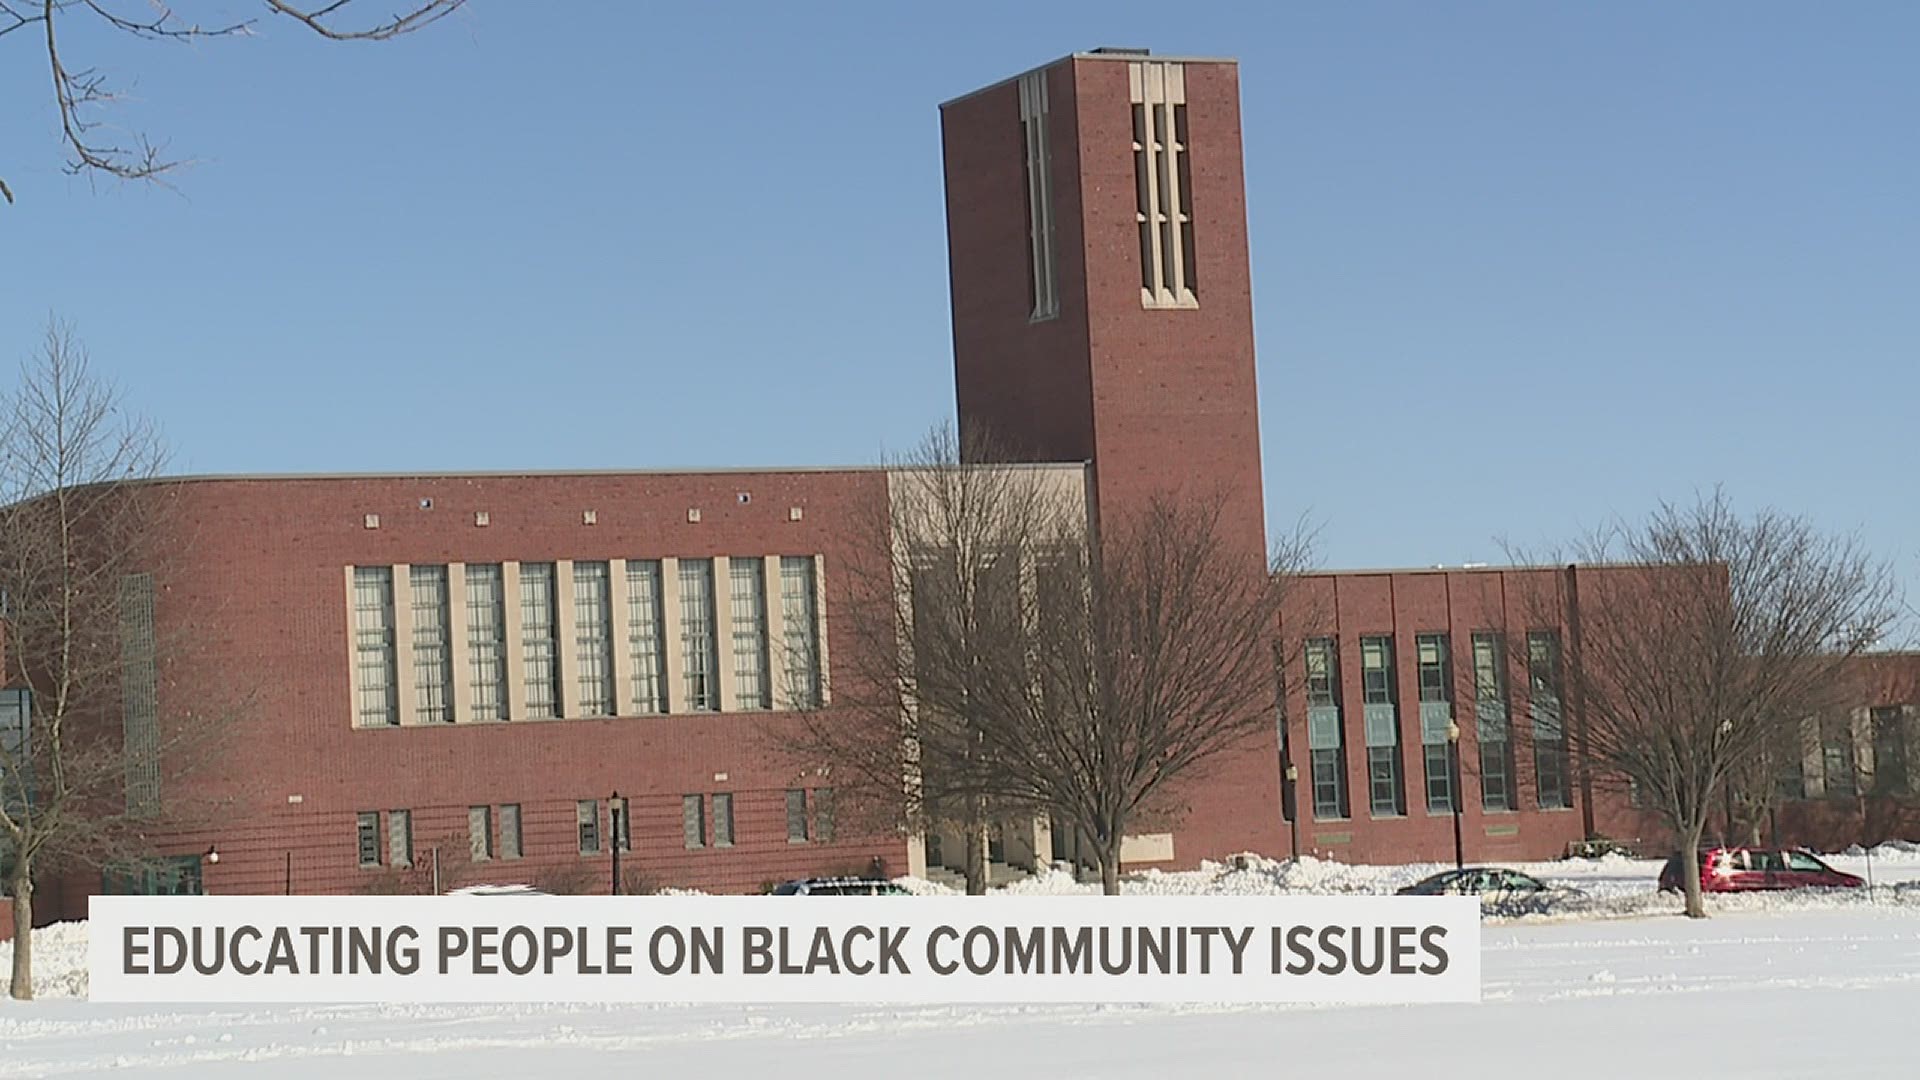 From implicit bias training to new curriculum in schools: Efforts are underway in Lancaster County to educate people on black community issues.